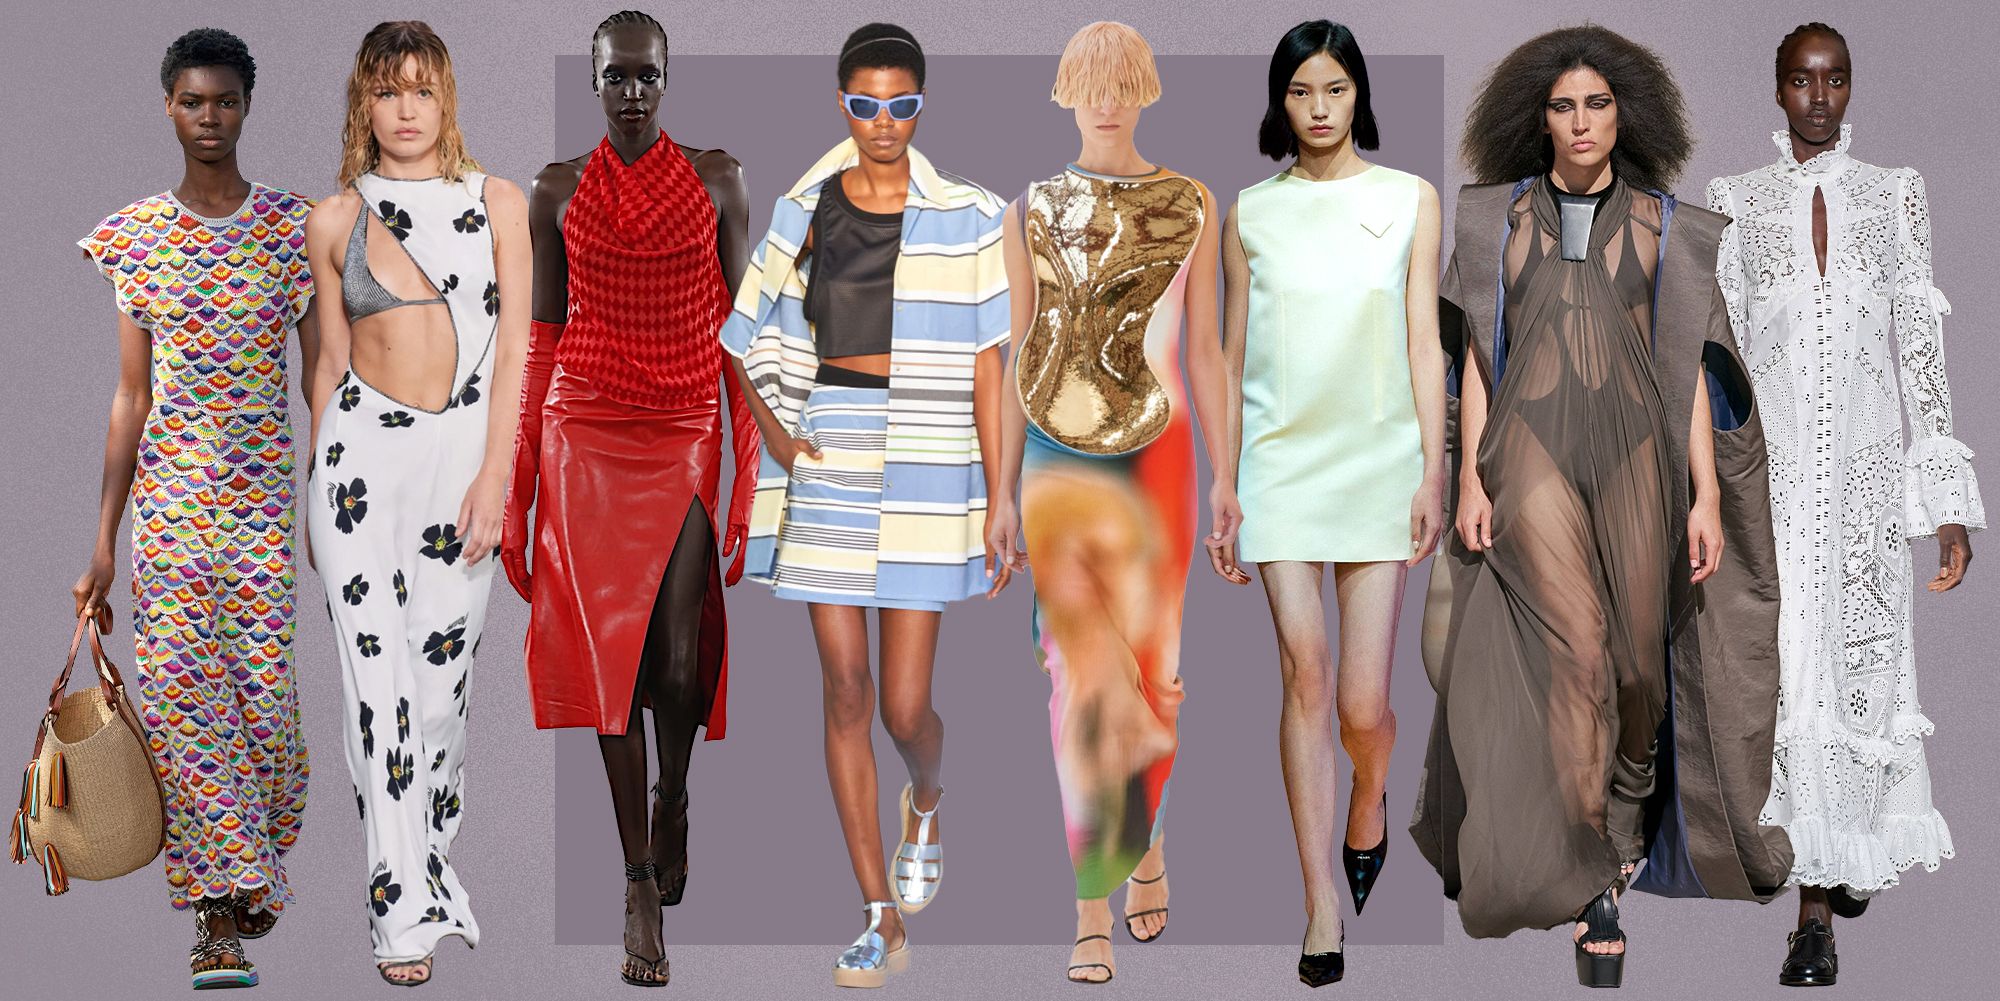 10 Of The Hottest Fashion Trends Of 2022 That We're Taking With Us